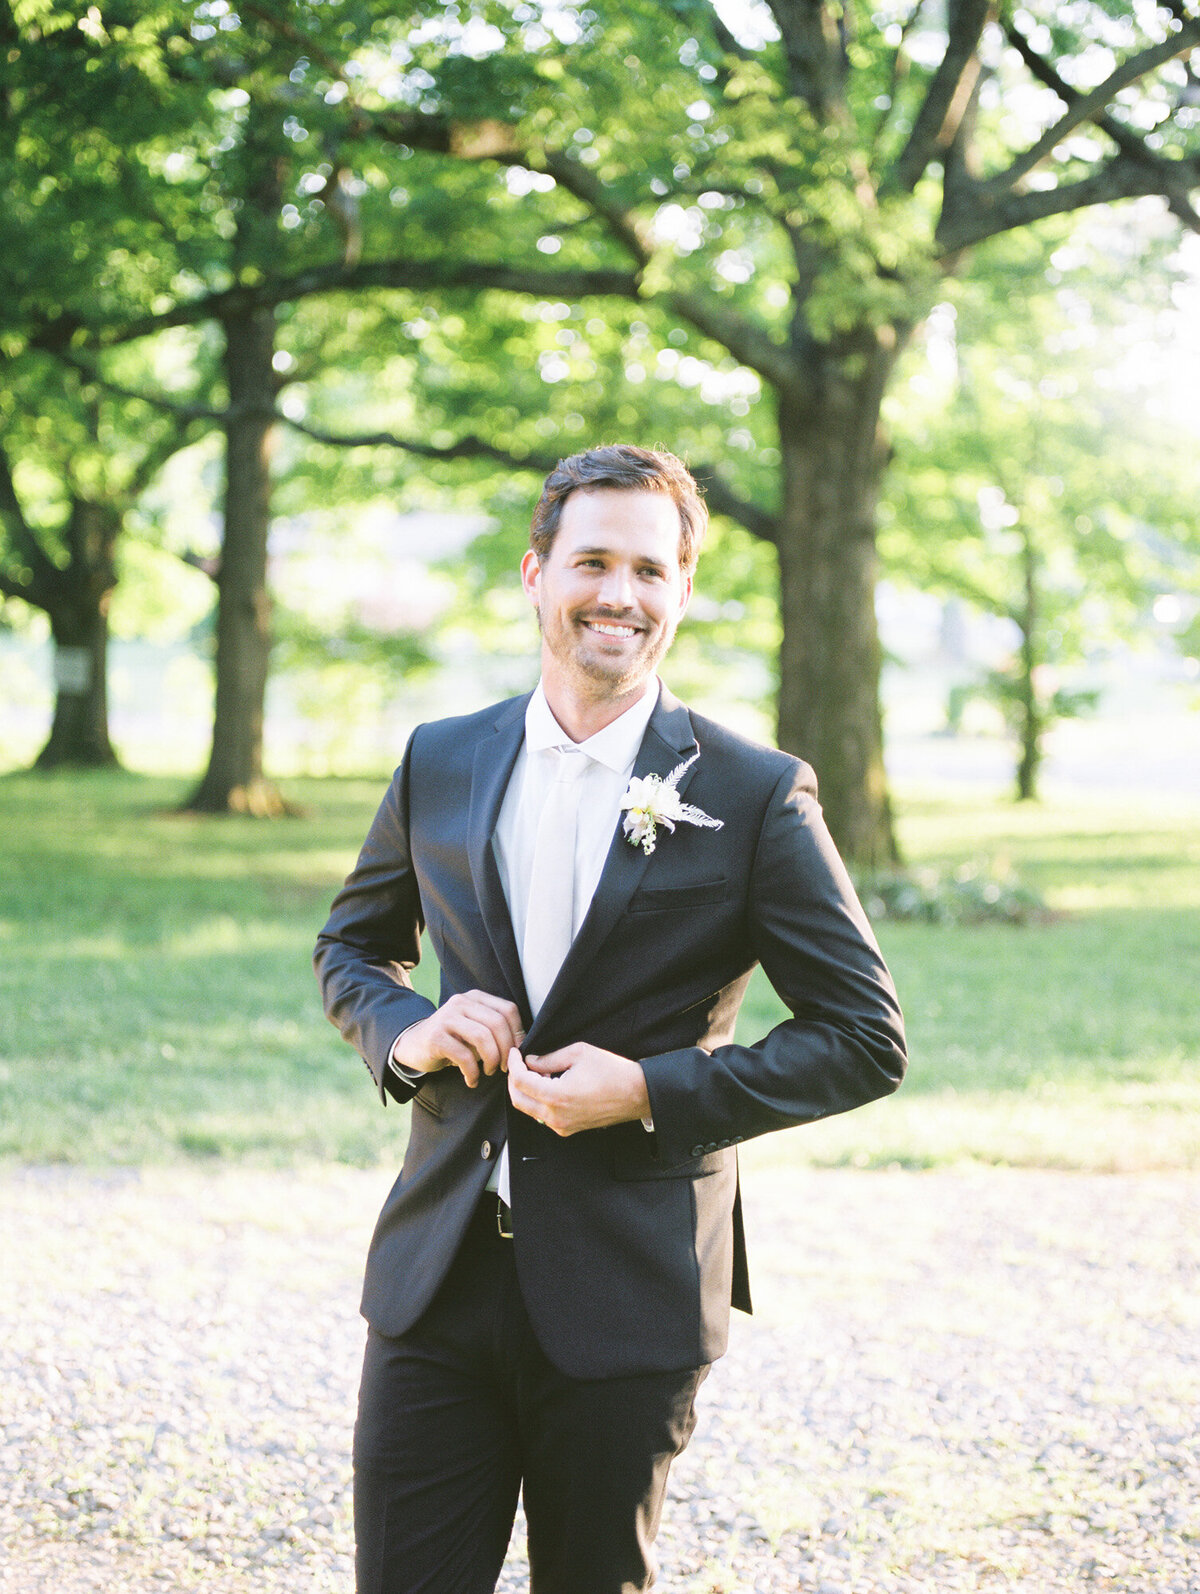 A handsome groom buttons his jacket in front of the lush greenery by Huntsville wedding photographer, Kelsey Dawn Photography